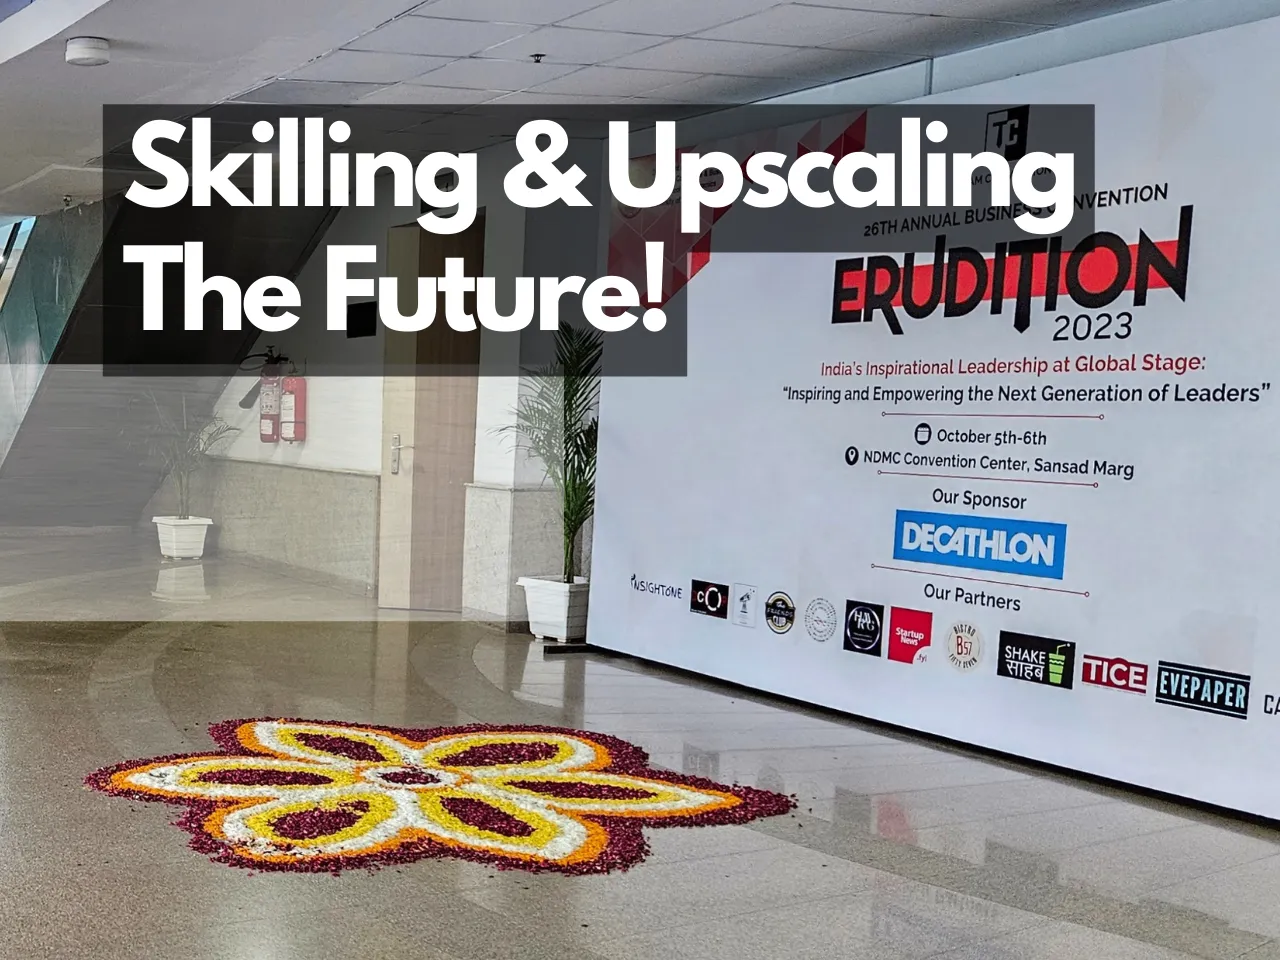 Skilling & upscaling is the future